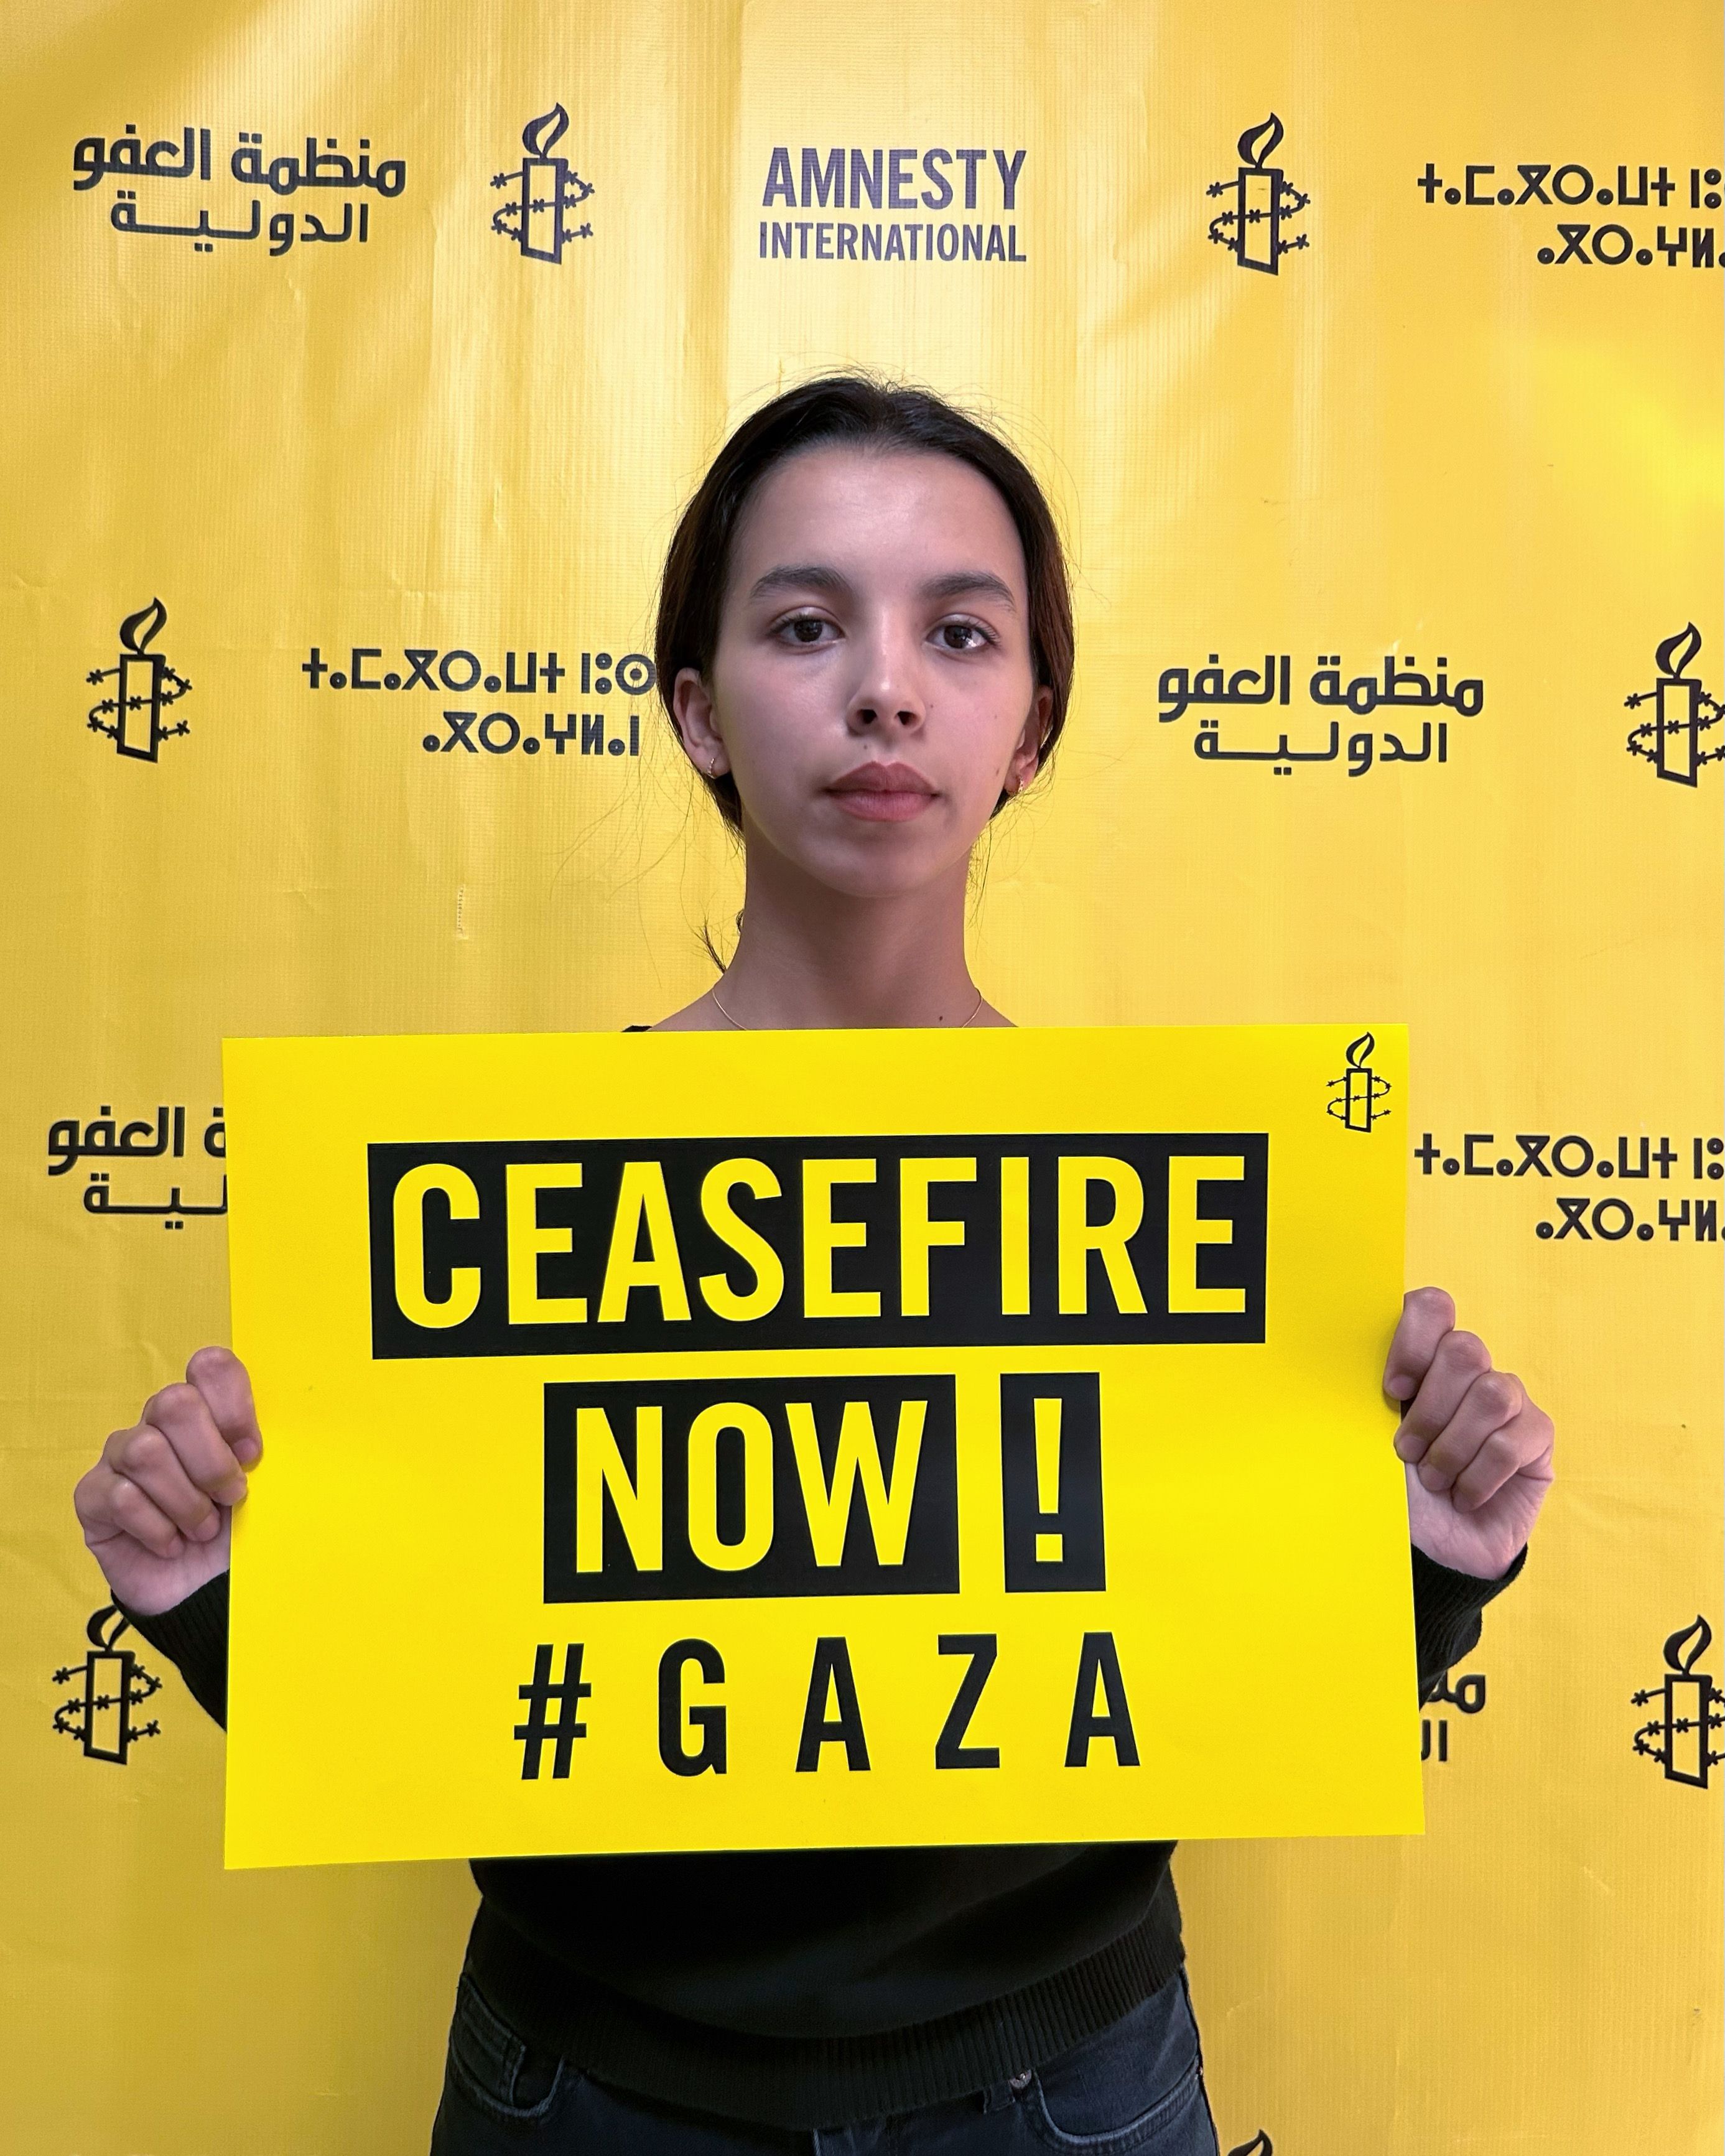 An Amnesty supporter holds a sign calling for a ceasefire in Gaza